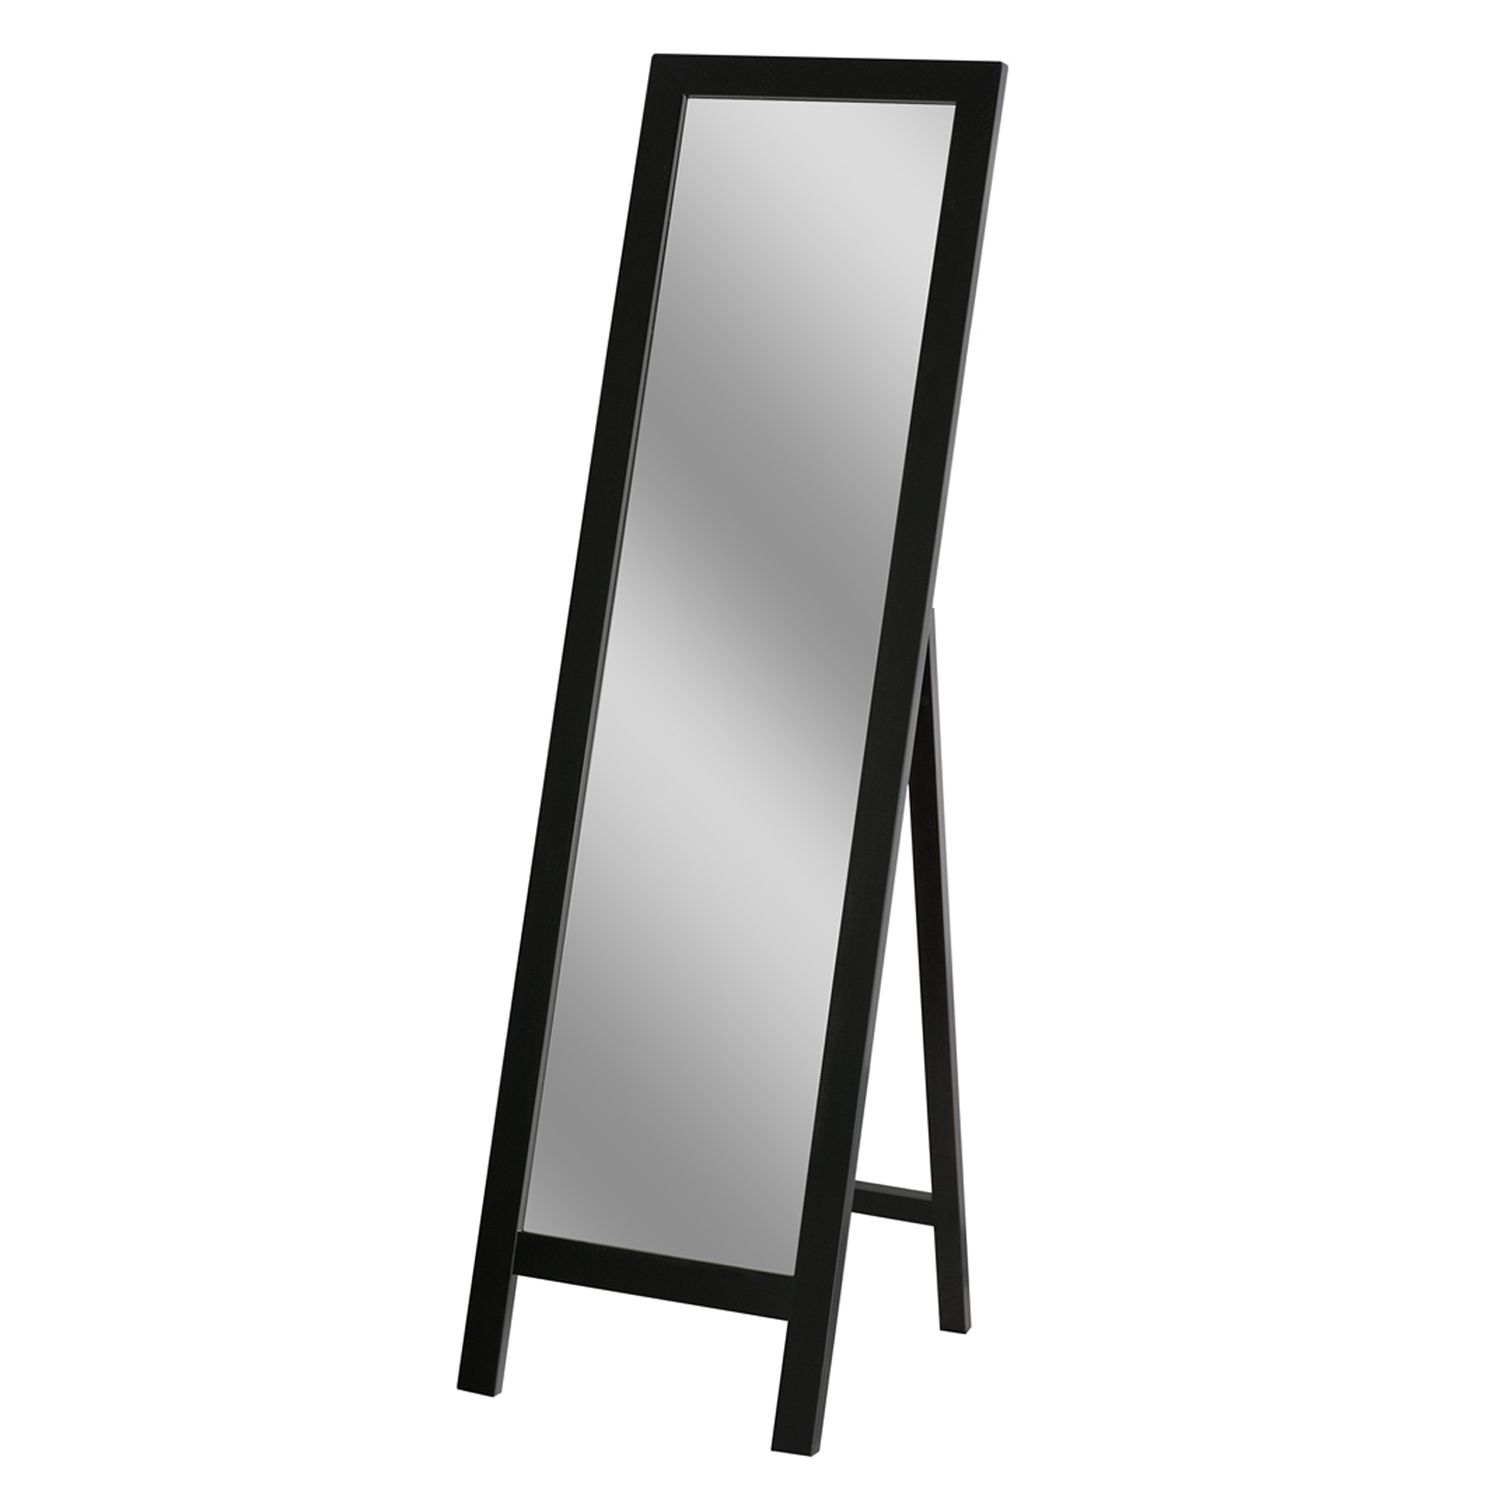 Image for Head West Espresso Easel Mirror at Kohl's.